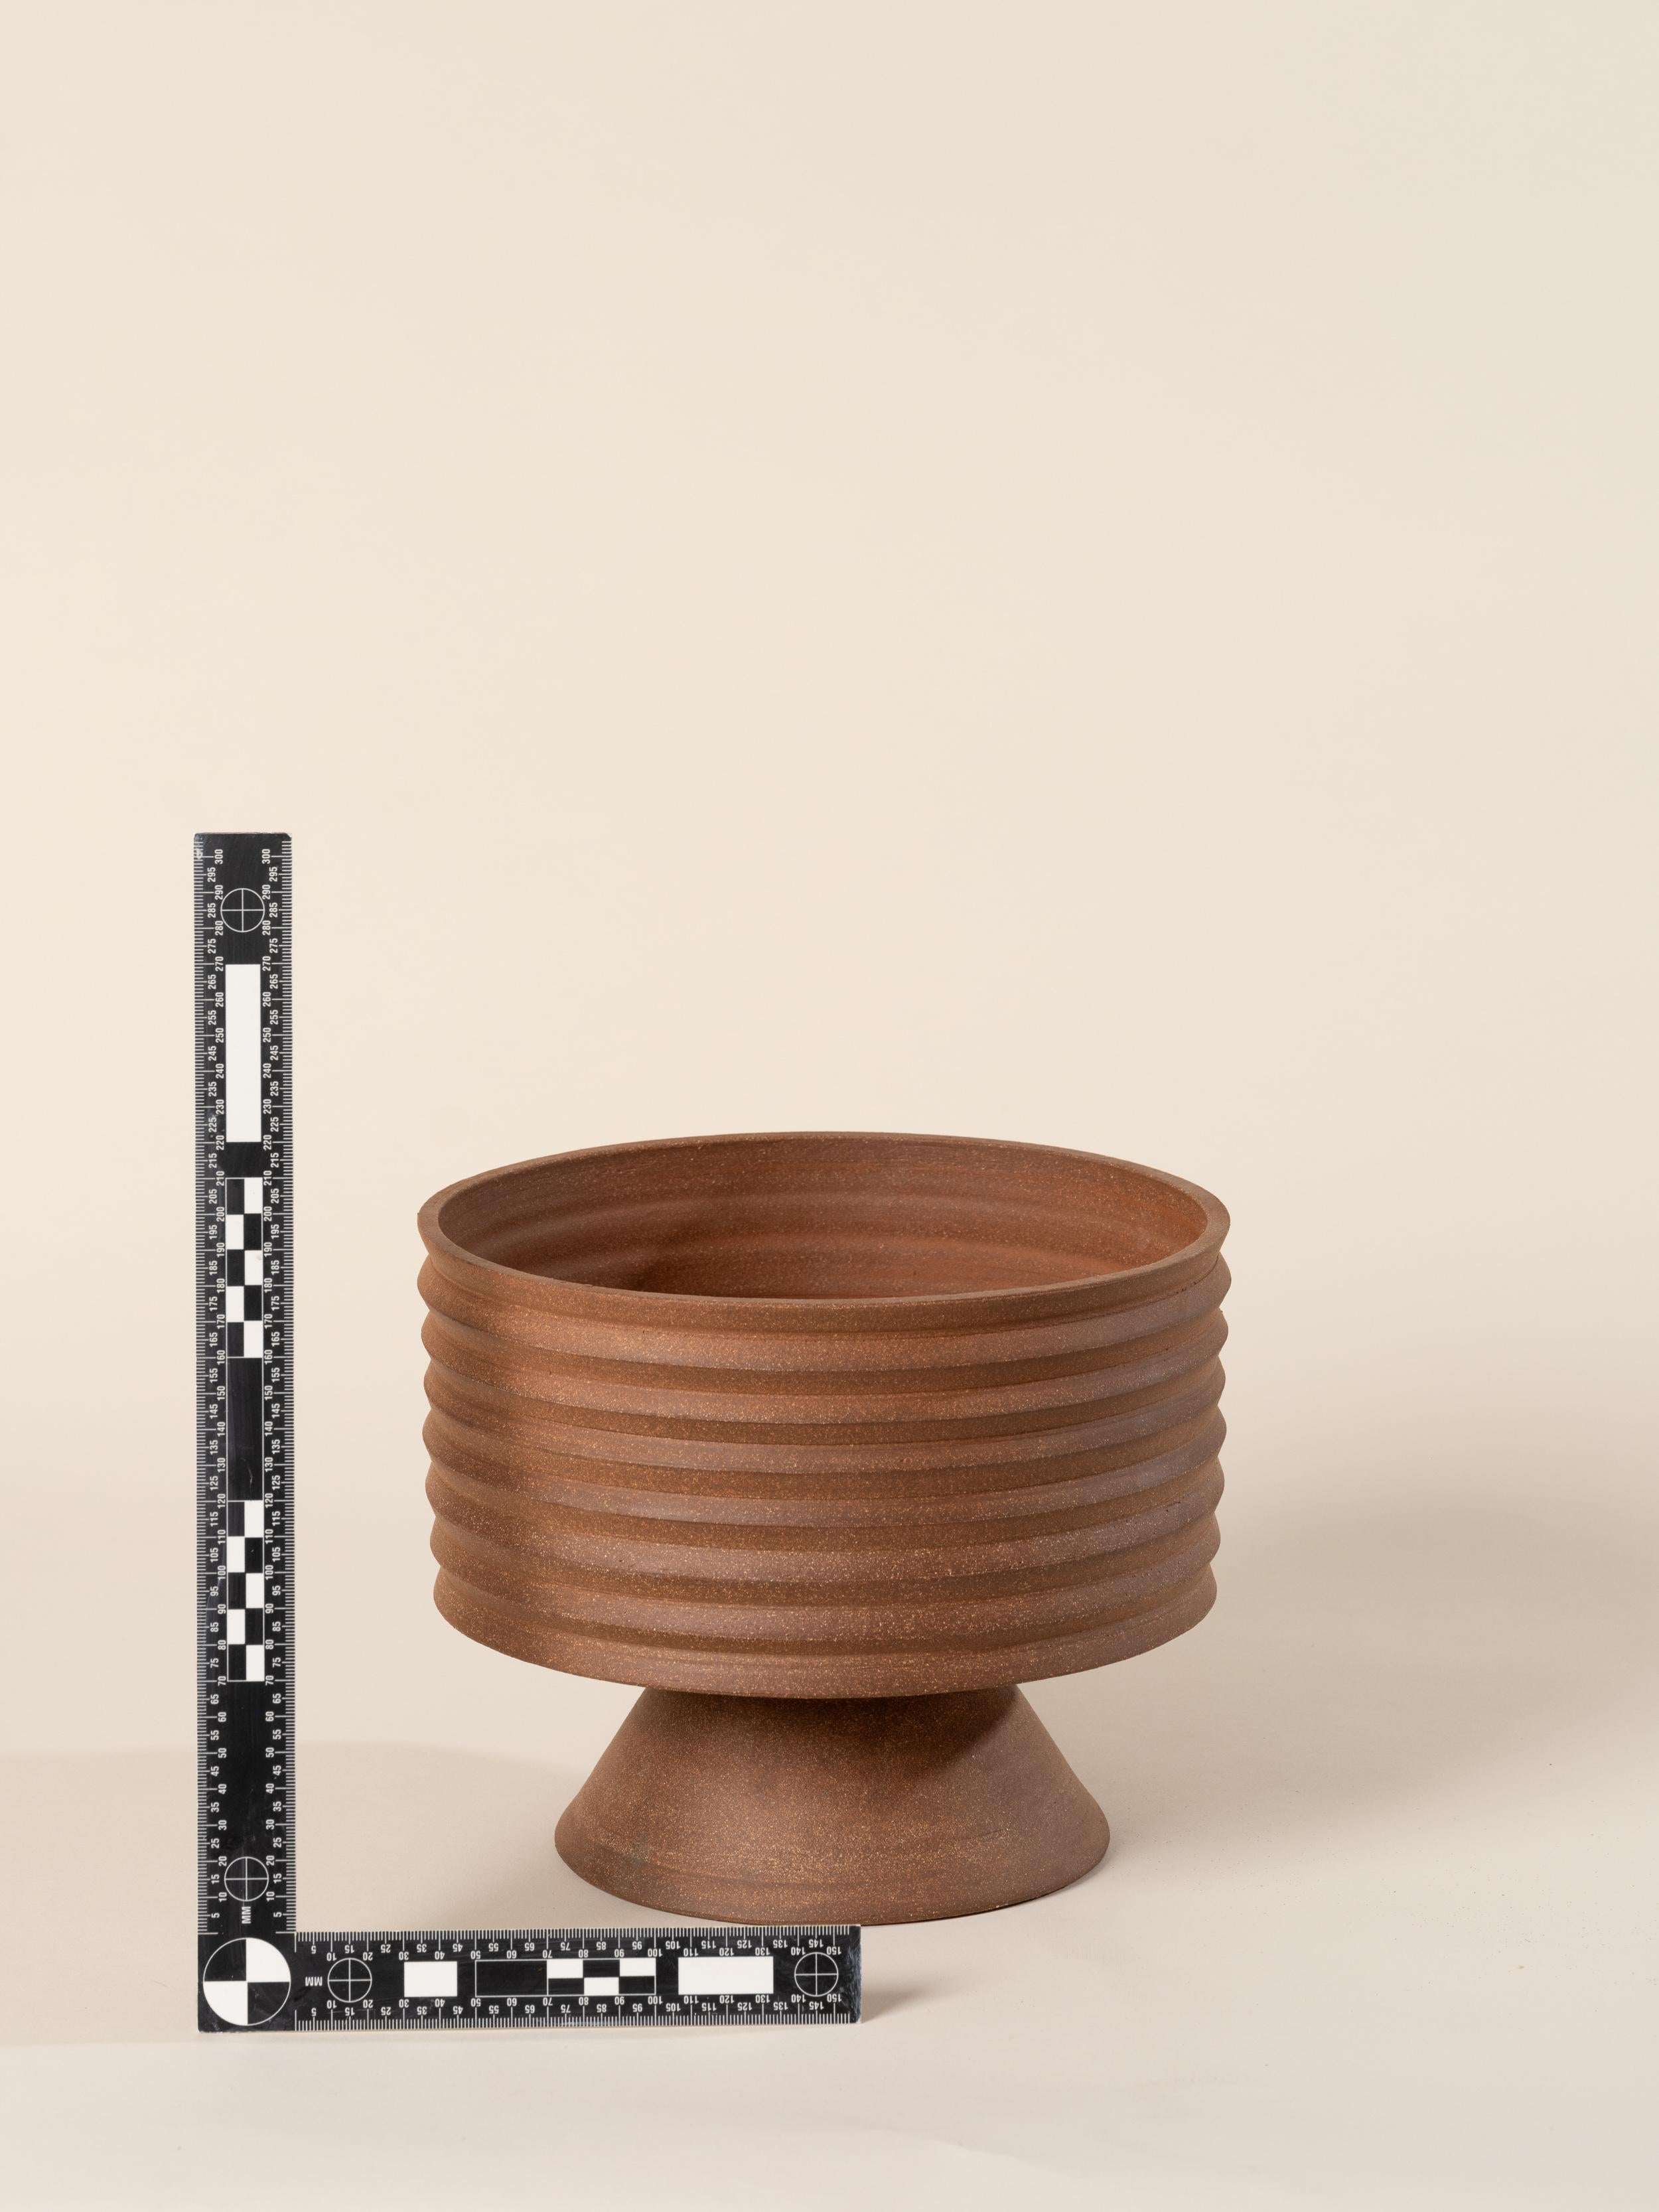 2-part wheel-thrown planter in red stoneware.

Dimensions: approx. 8” h x 9.5” w

The upper part features a drainage hole for optimal plant health, and the bottom part collects excess water – make sure to empty it periodically.